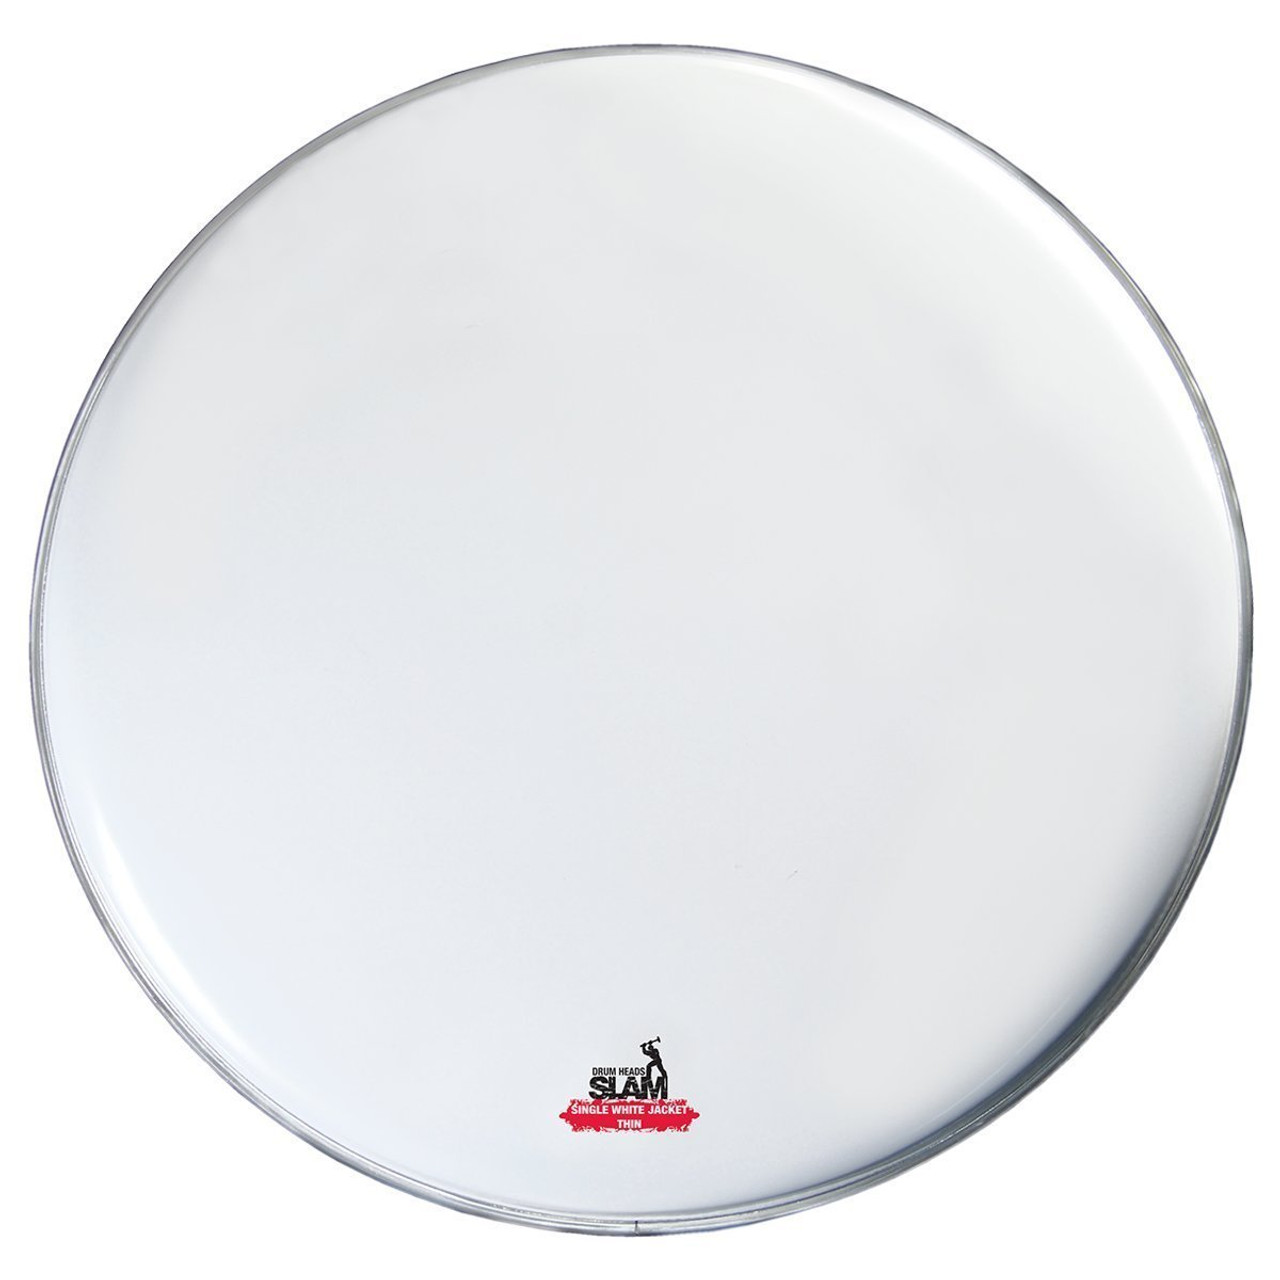 Slam Single Ply Smooth Coated Thin Weight Drum Head (14")